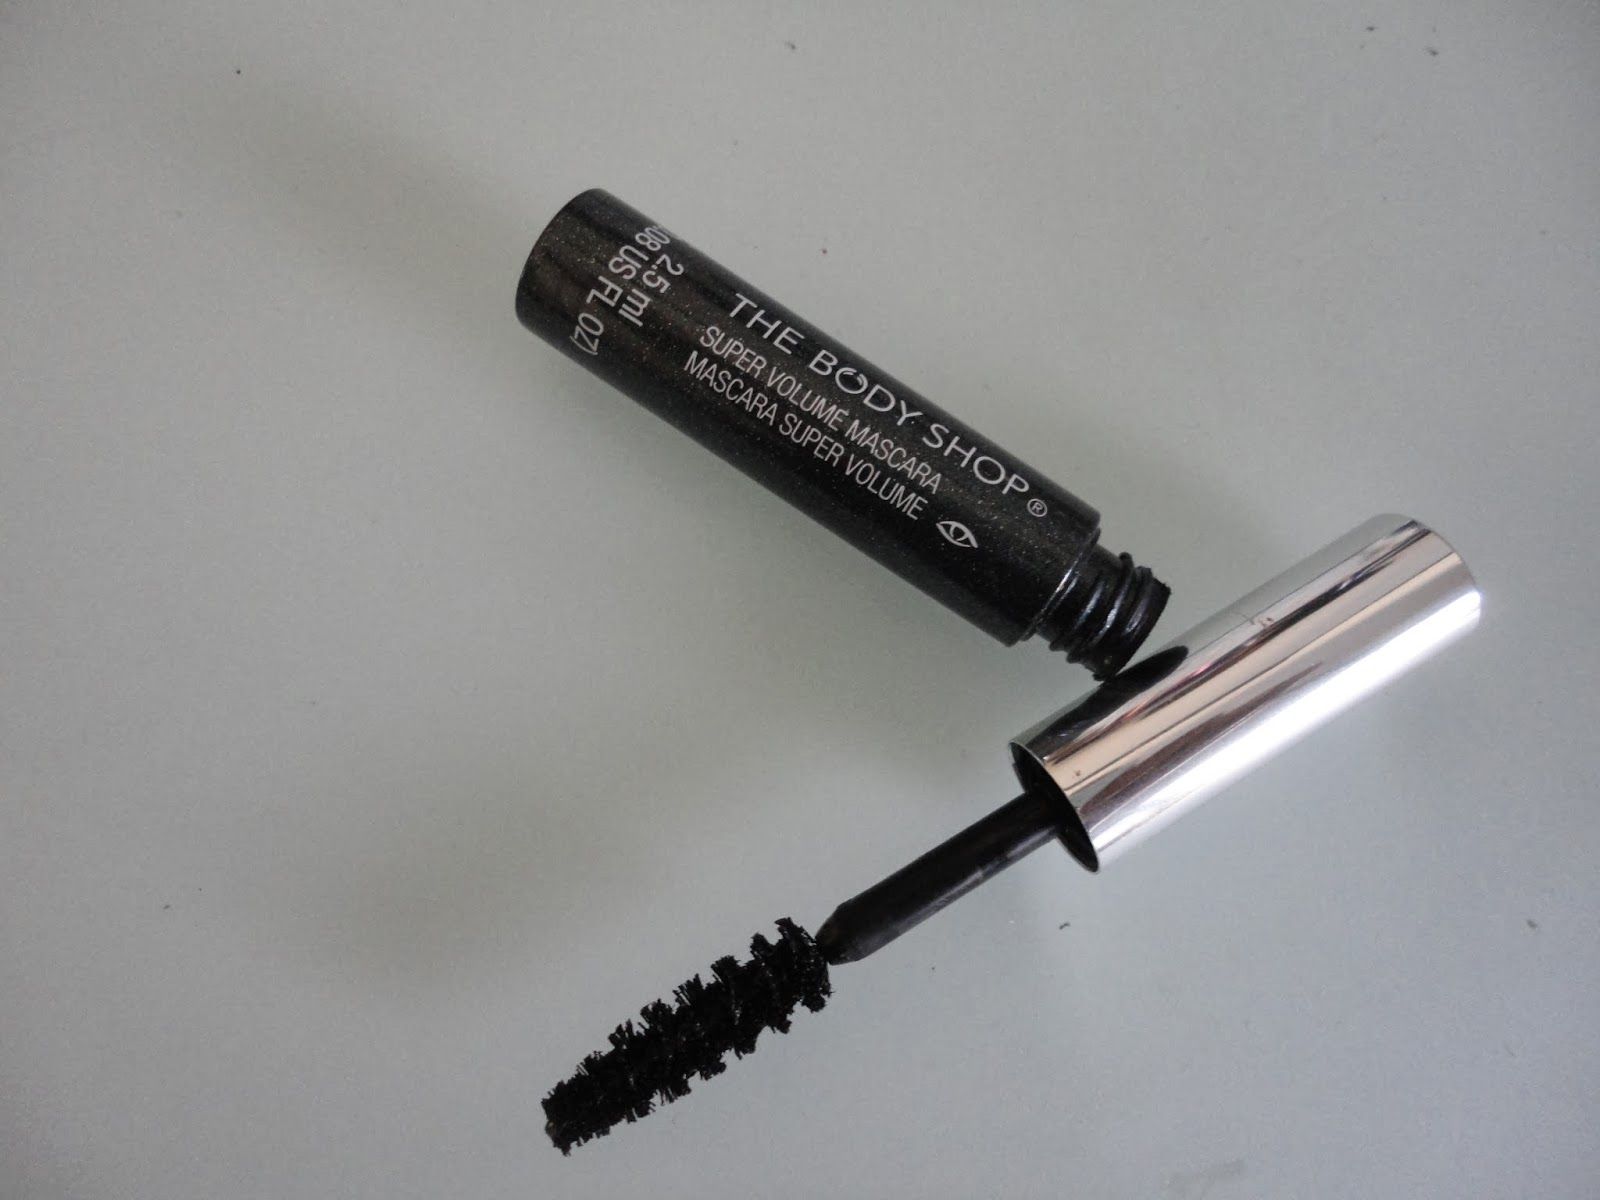 mascara from body shop - Know Best 10 Mascaras in 2018 for Length & Volume with Reviews & Price